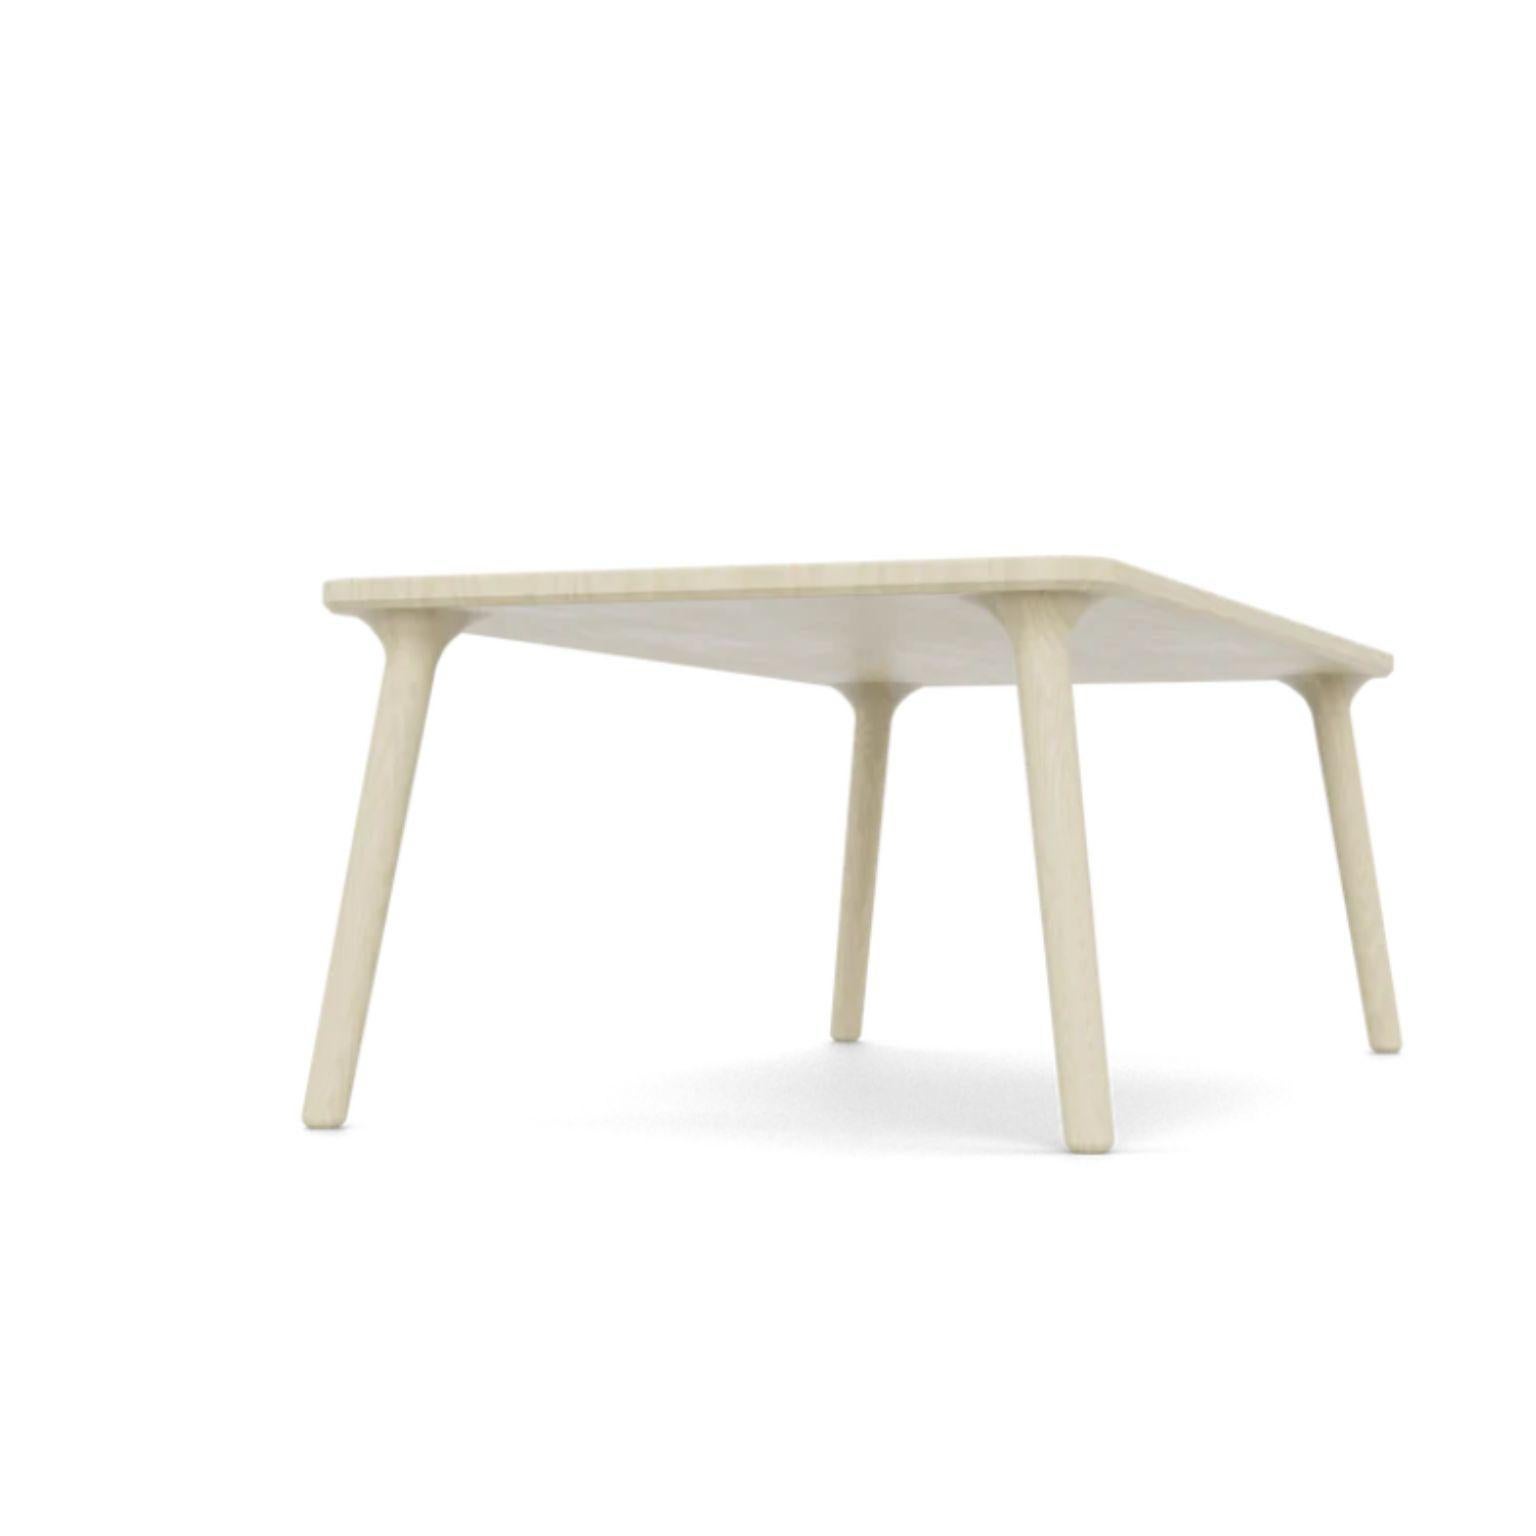 Modern White Ash Coffee Table Mod 2 by Fernweh Woodworking